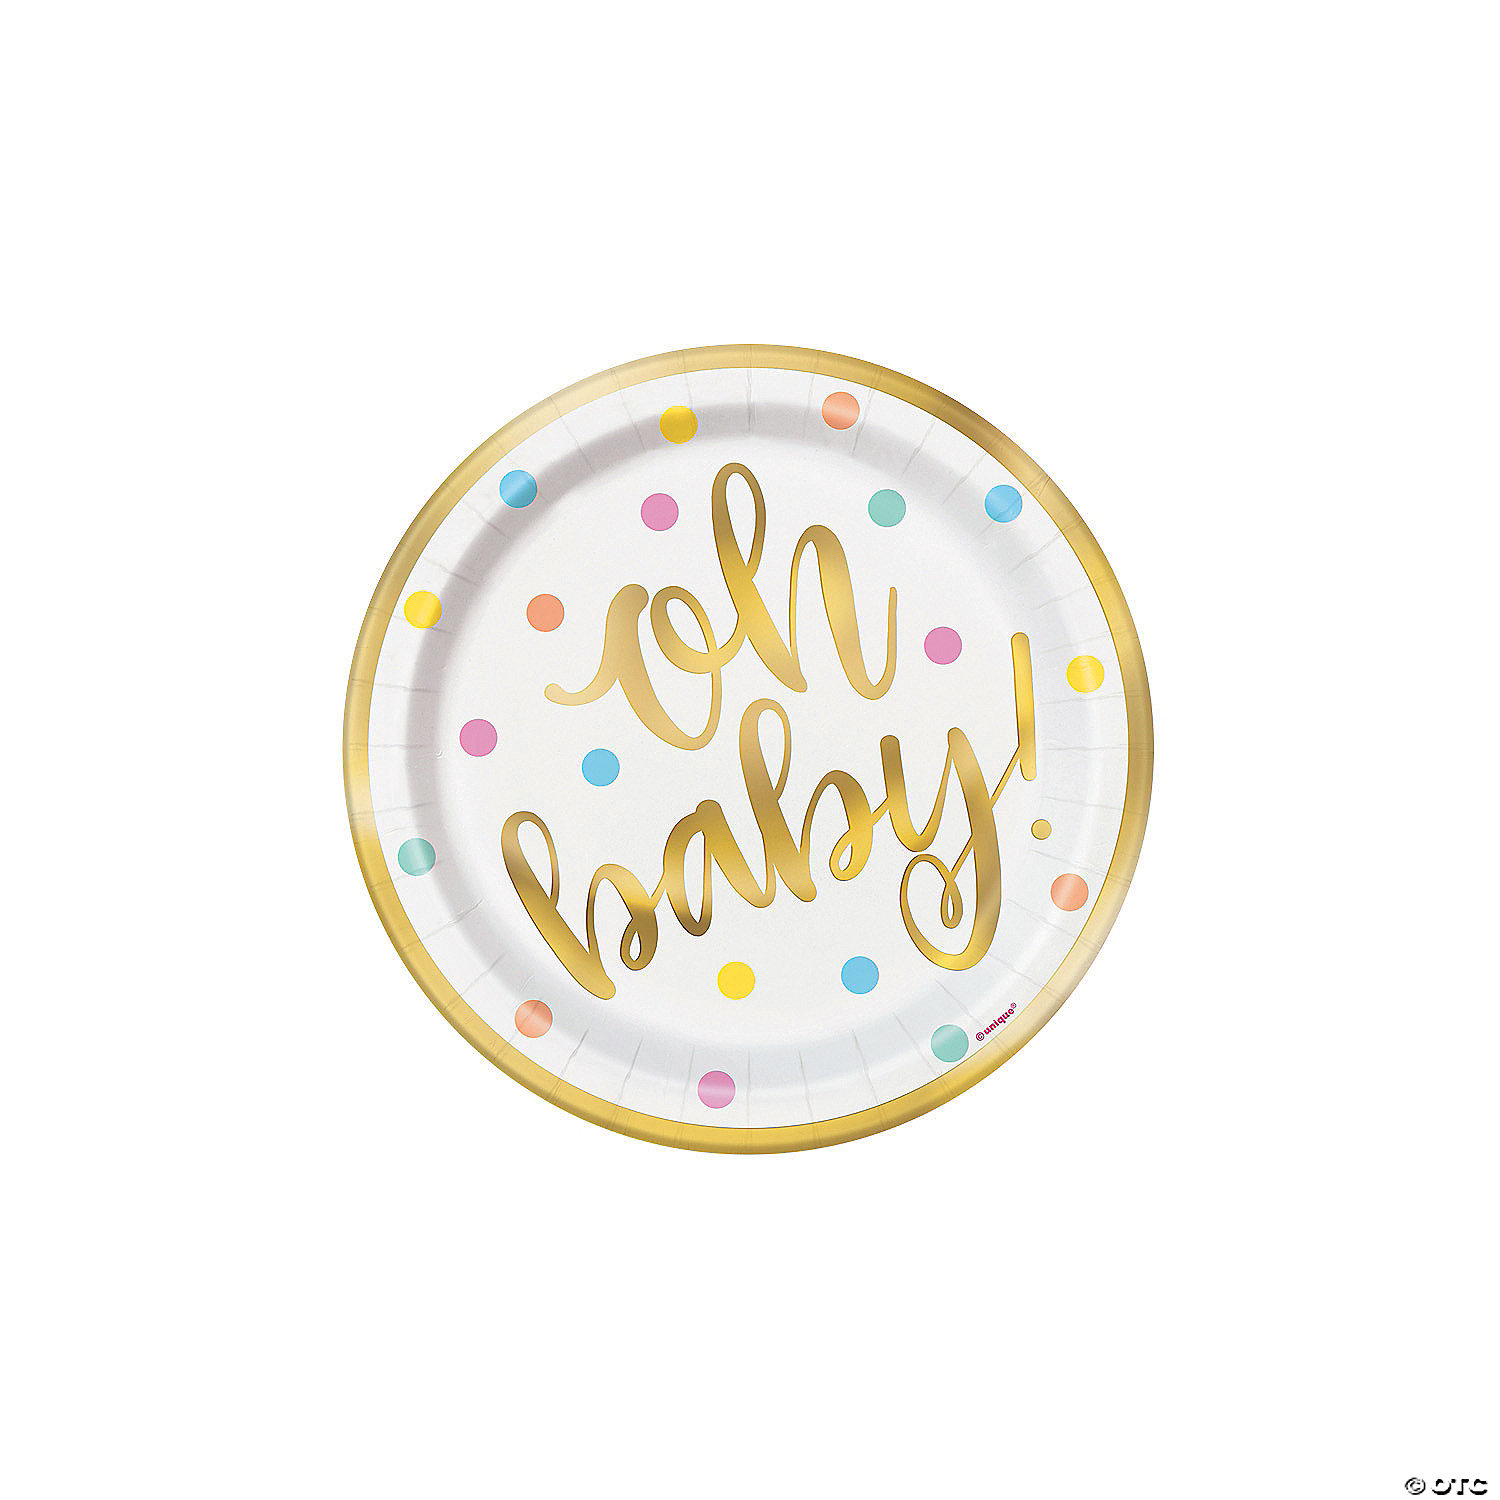 BABY SHOWER DECORATIONS Tableware Gender Neutral BABY SHOWER CONFETTI OH BABY 